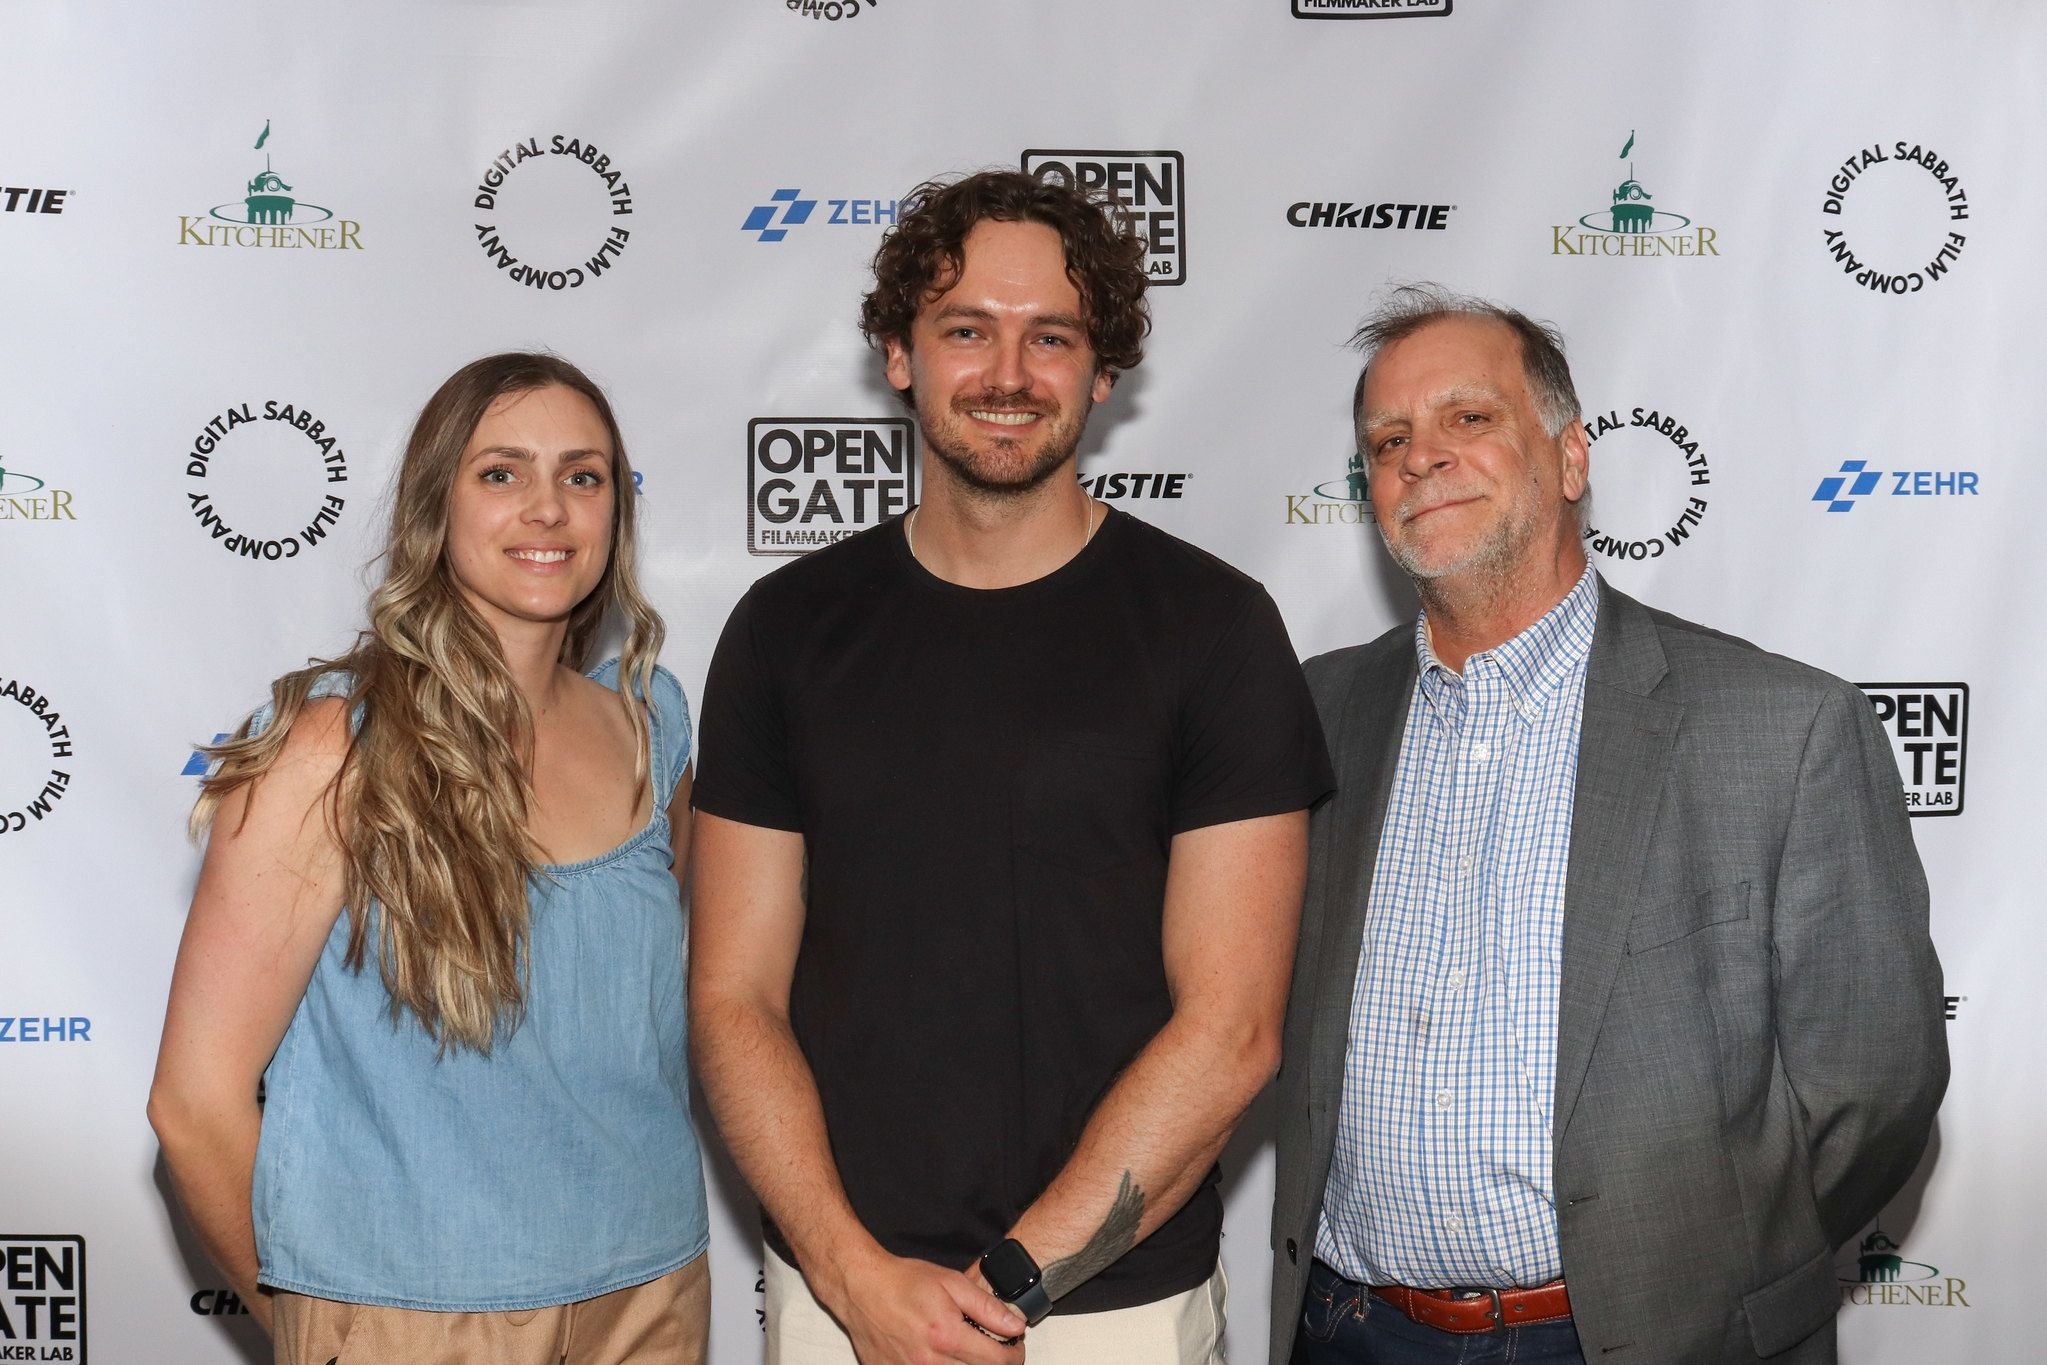 Katie Billo and Kyle Sawyer of Digital Sabbath and Bob Egan, City of Kitchener’s Film,music and interactive media officer at the premiere.